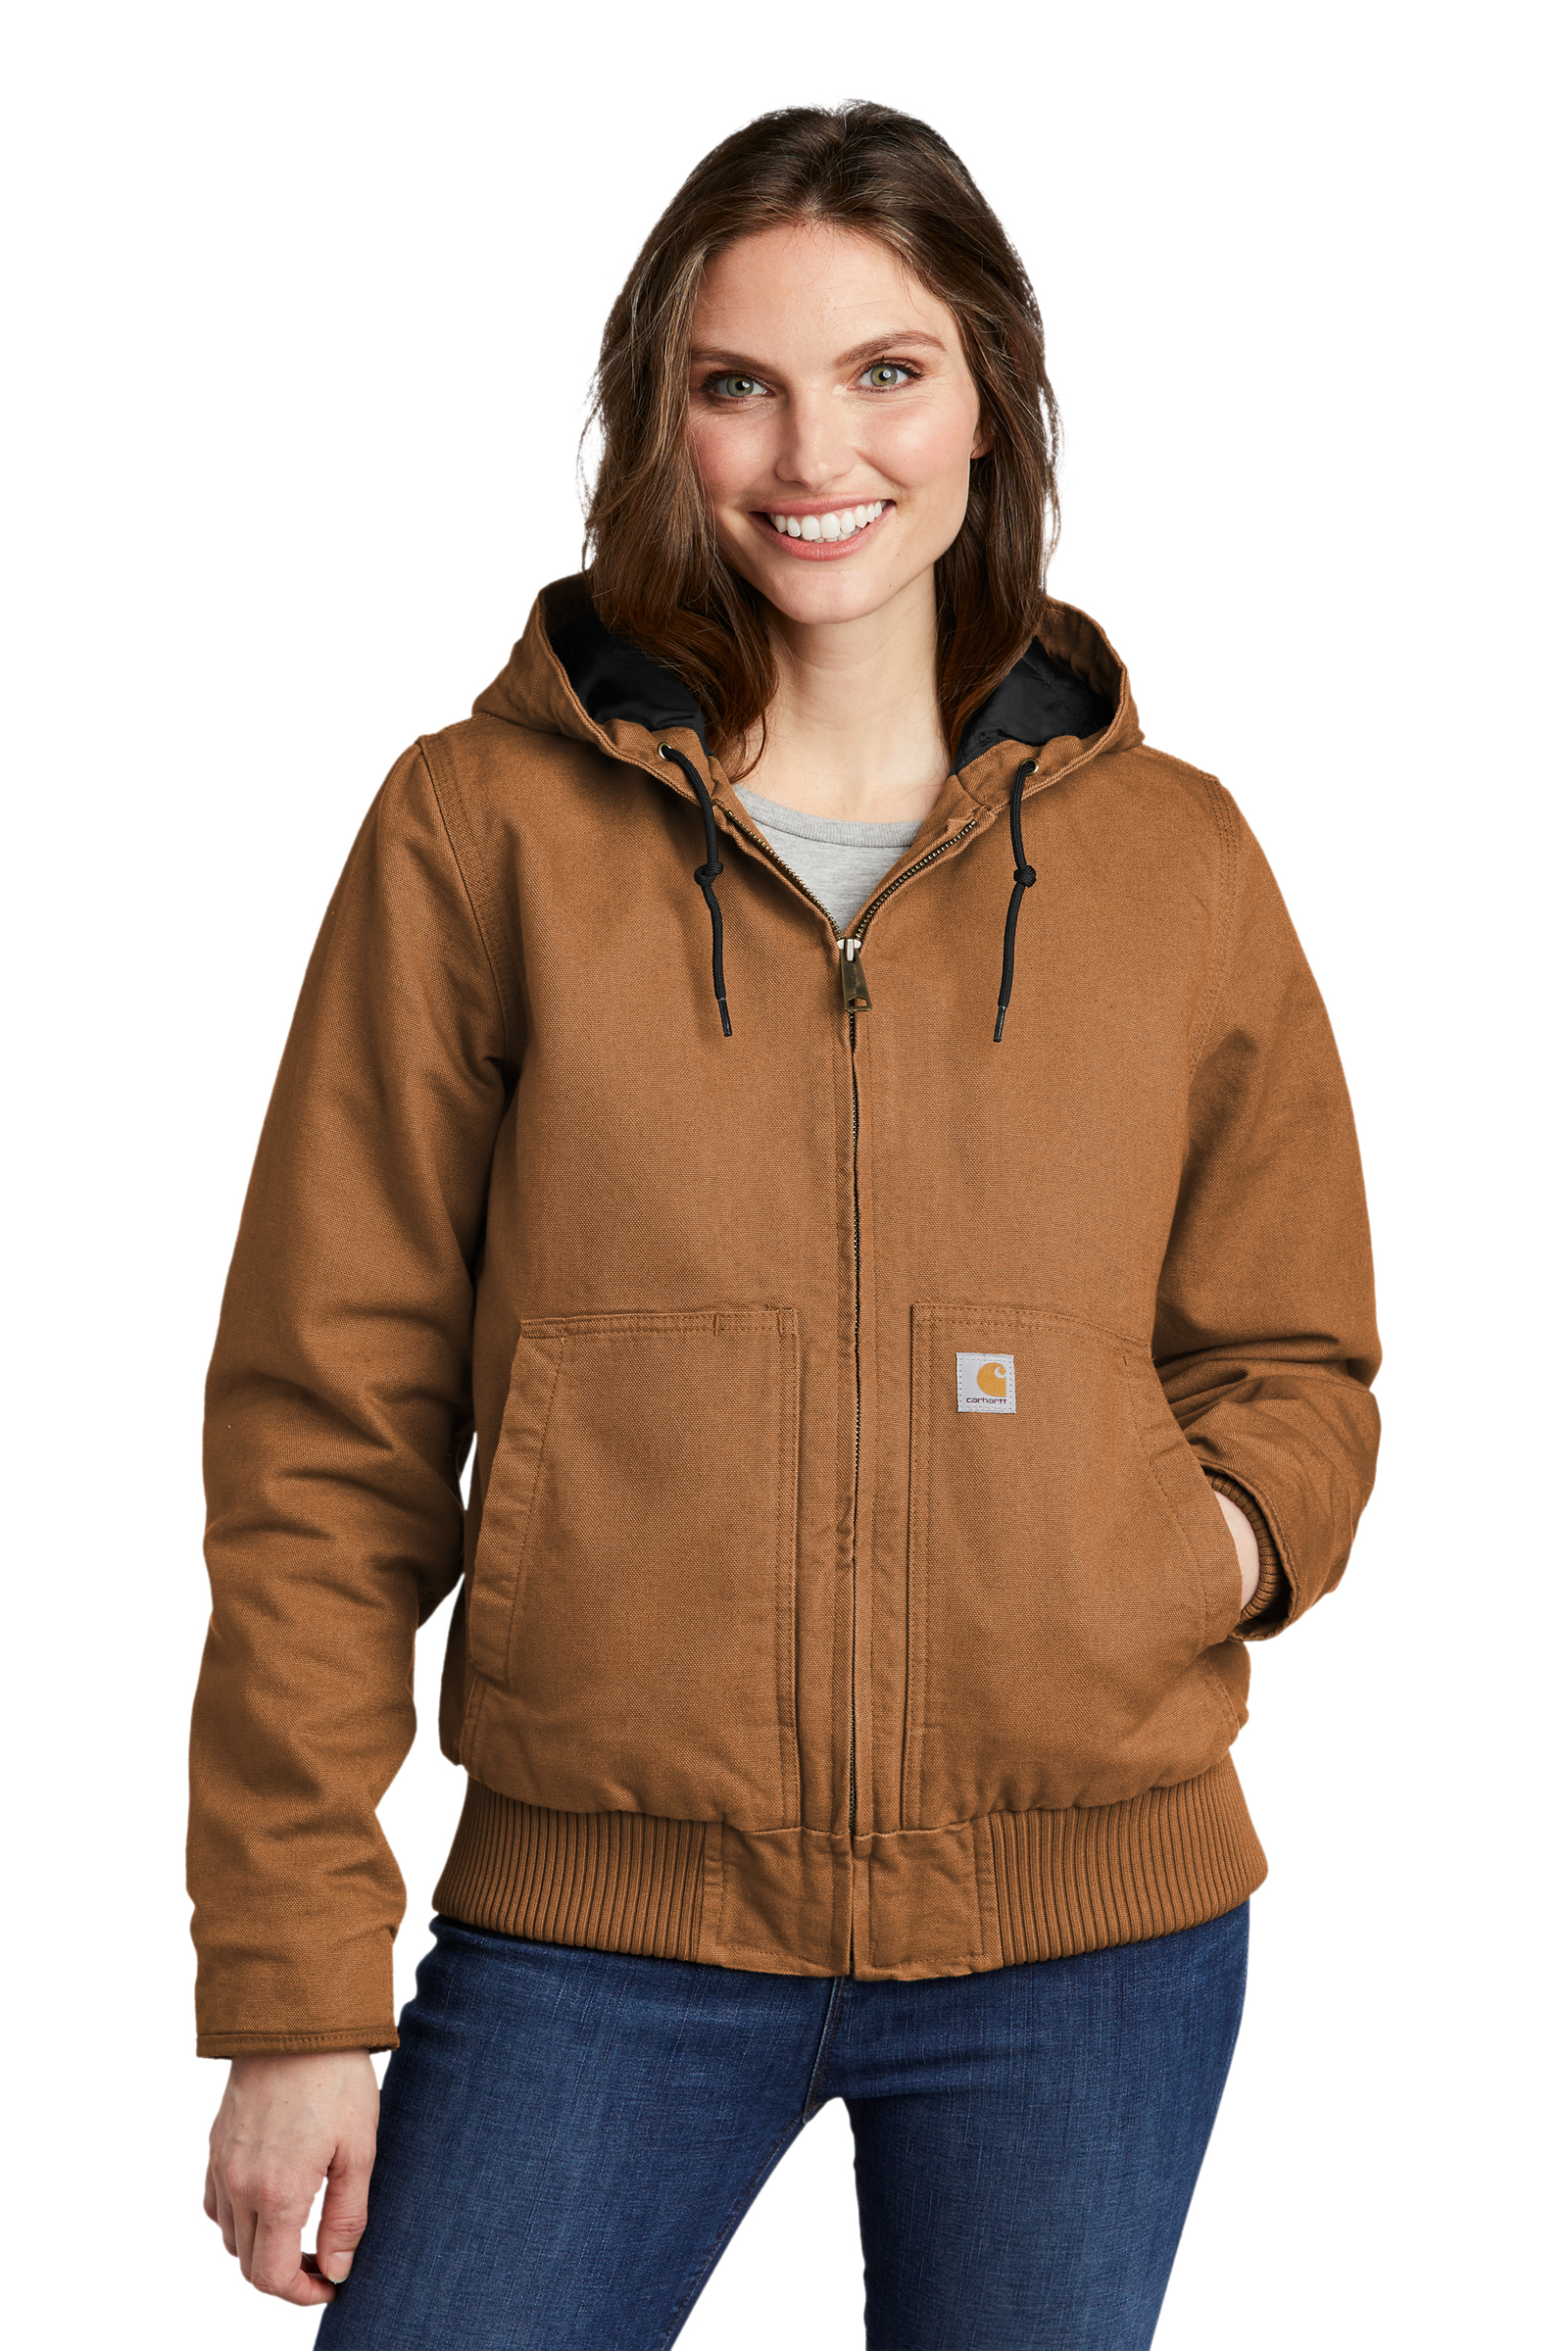 Carhartt Embroidered Women's Washed Duck Active Jacket